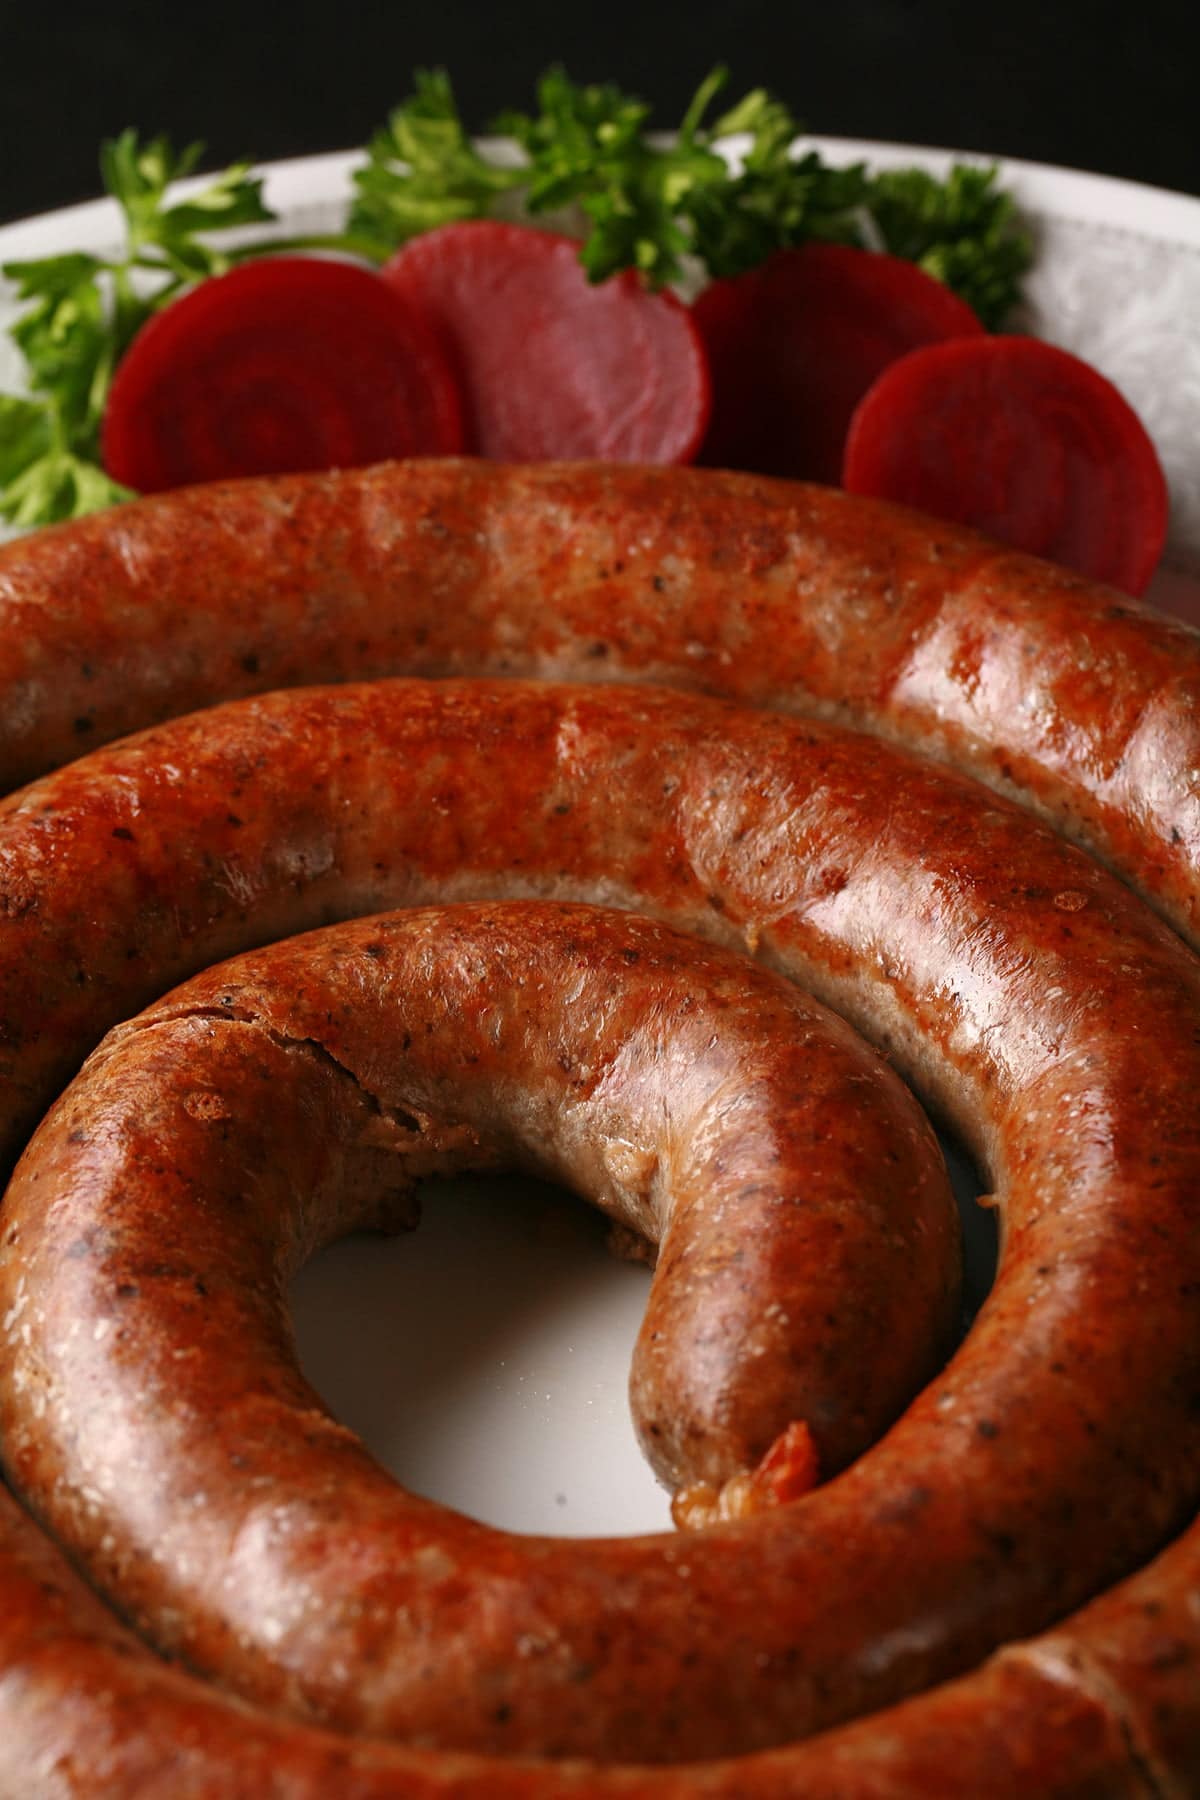 A large coil of potato sausage on a white plate. It’s garnished with slices of beet pickles and some parsley.